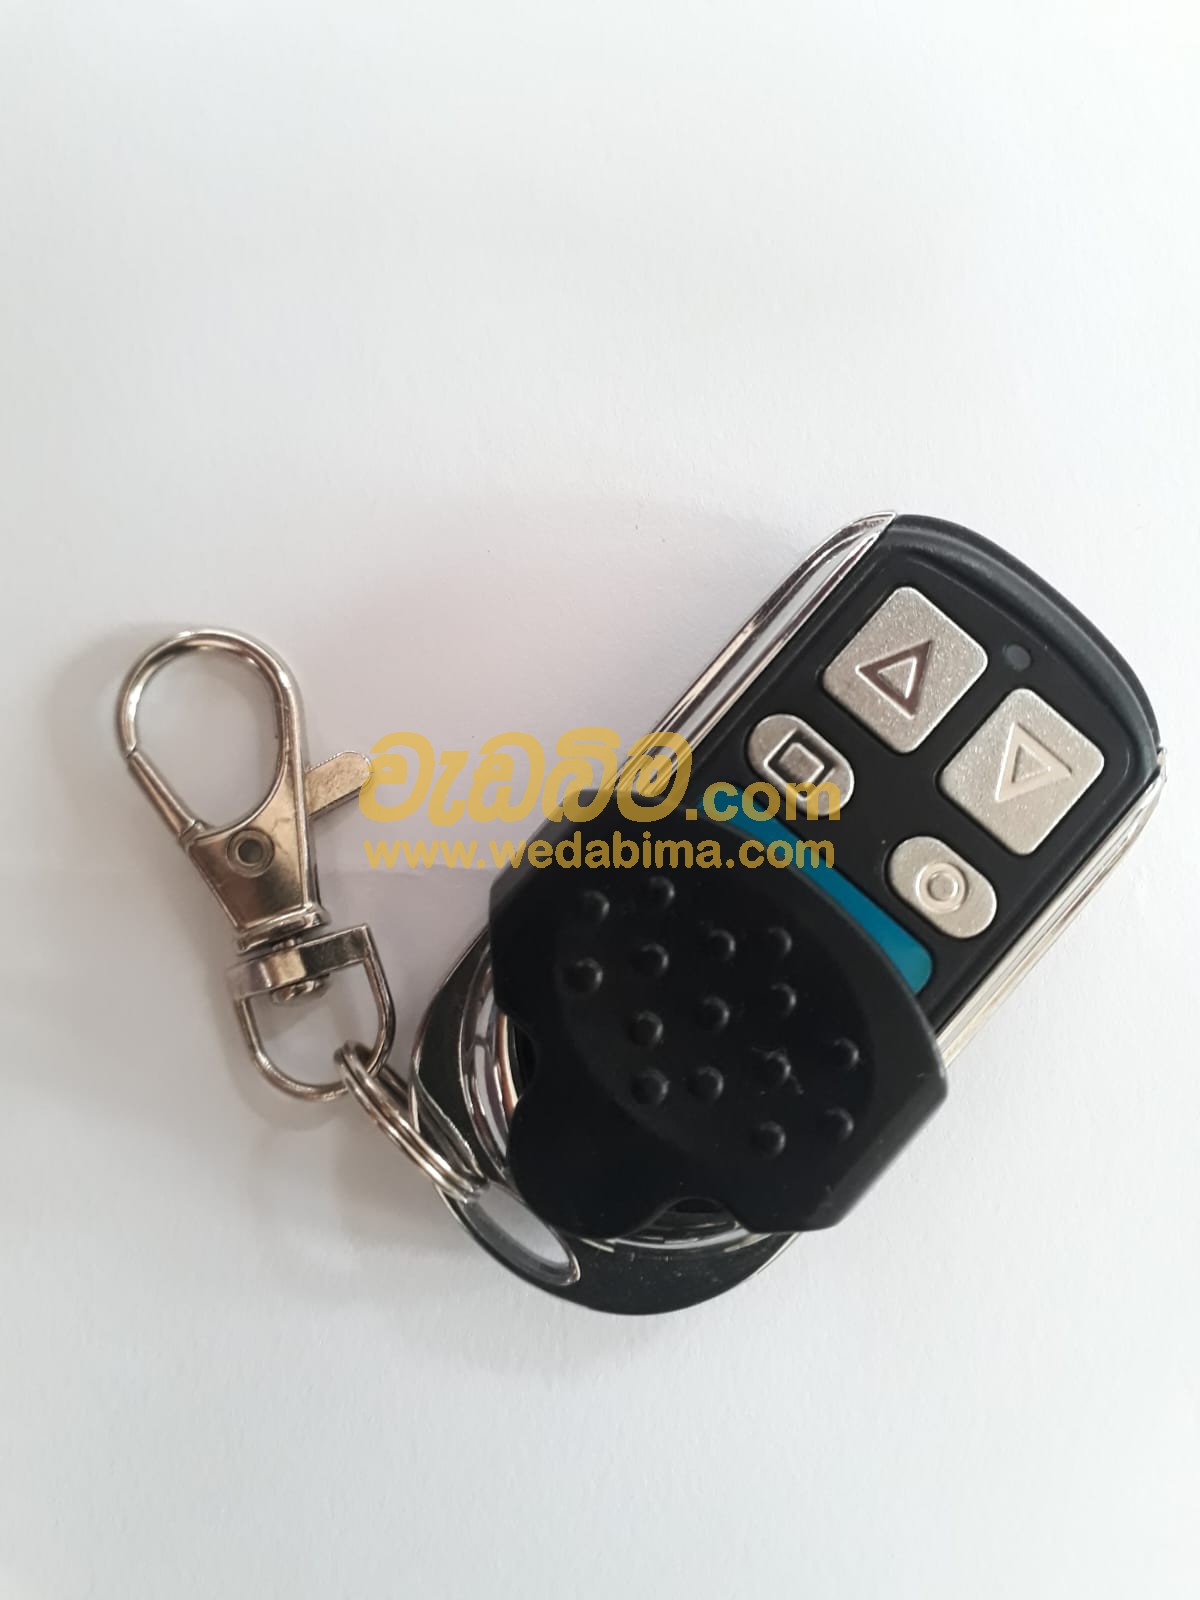 Remote controls for Automatic doors